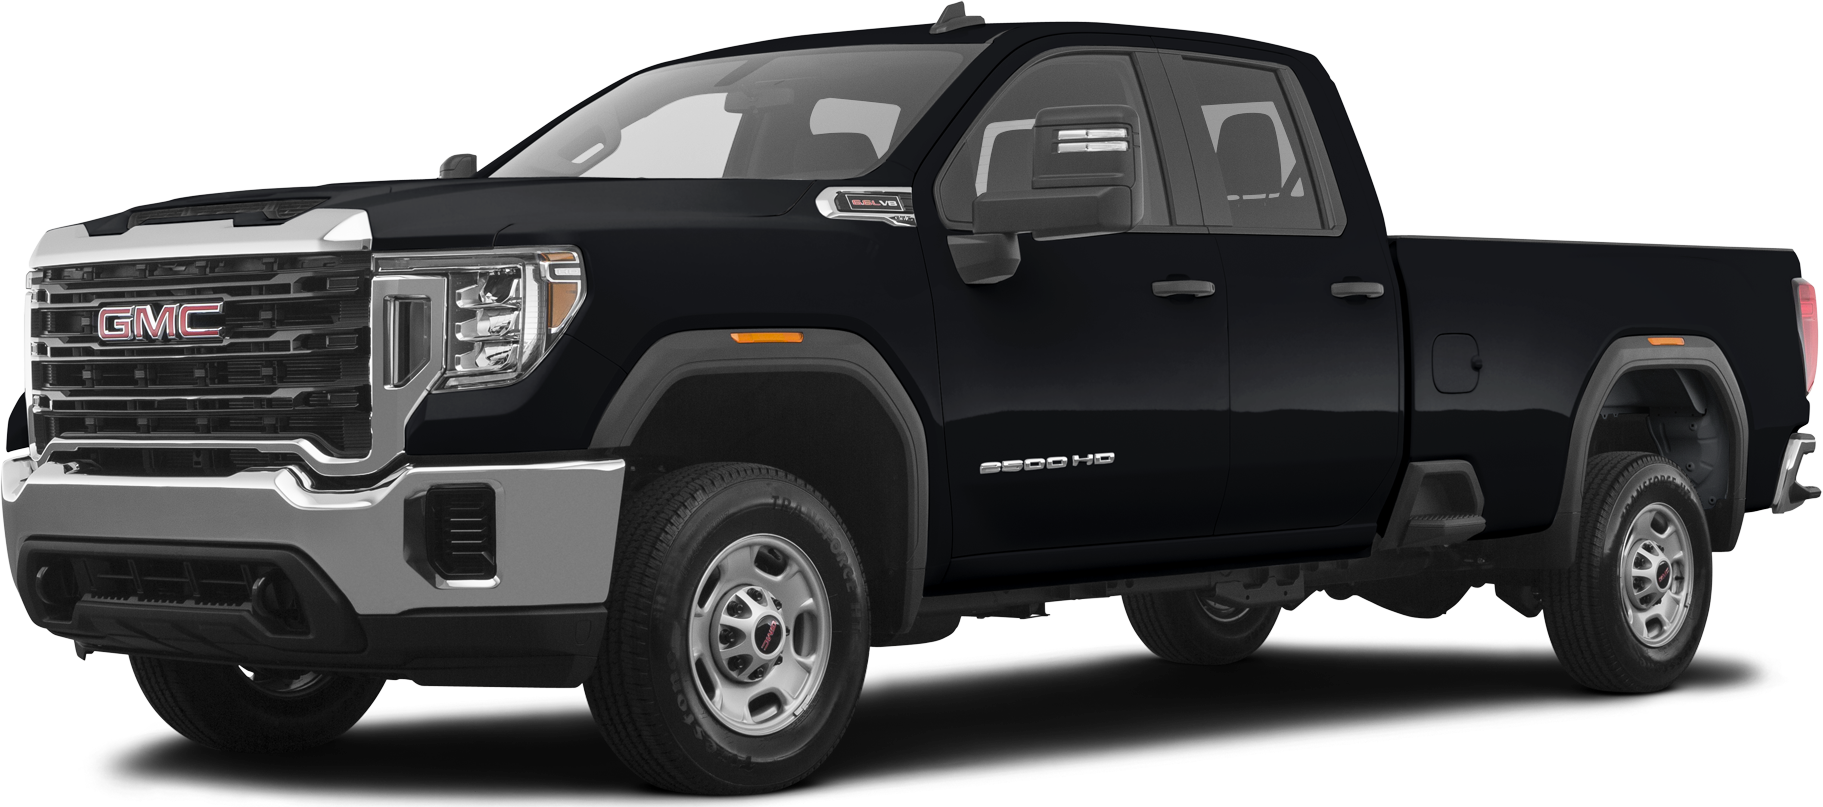 2020 Gmc Sierra 2500 Hd Double Cab Price Value Ratings And Reviews